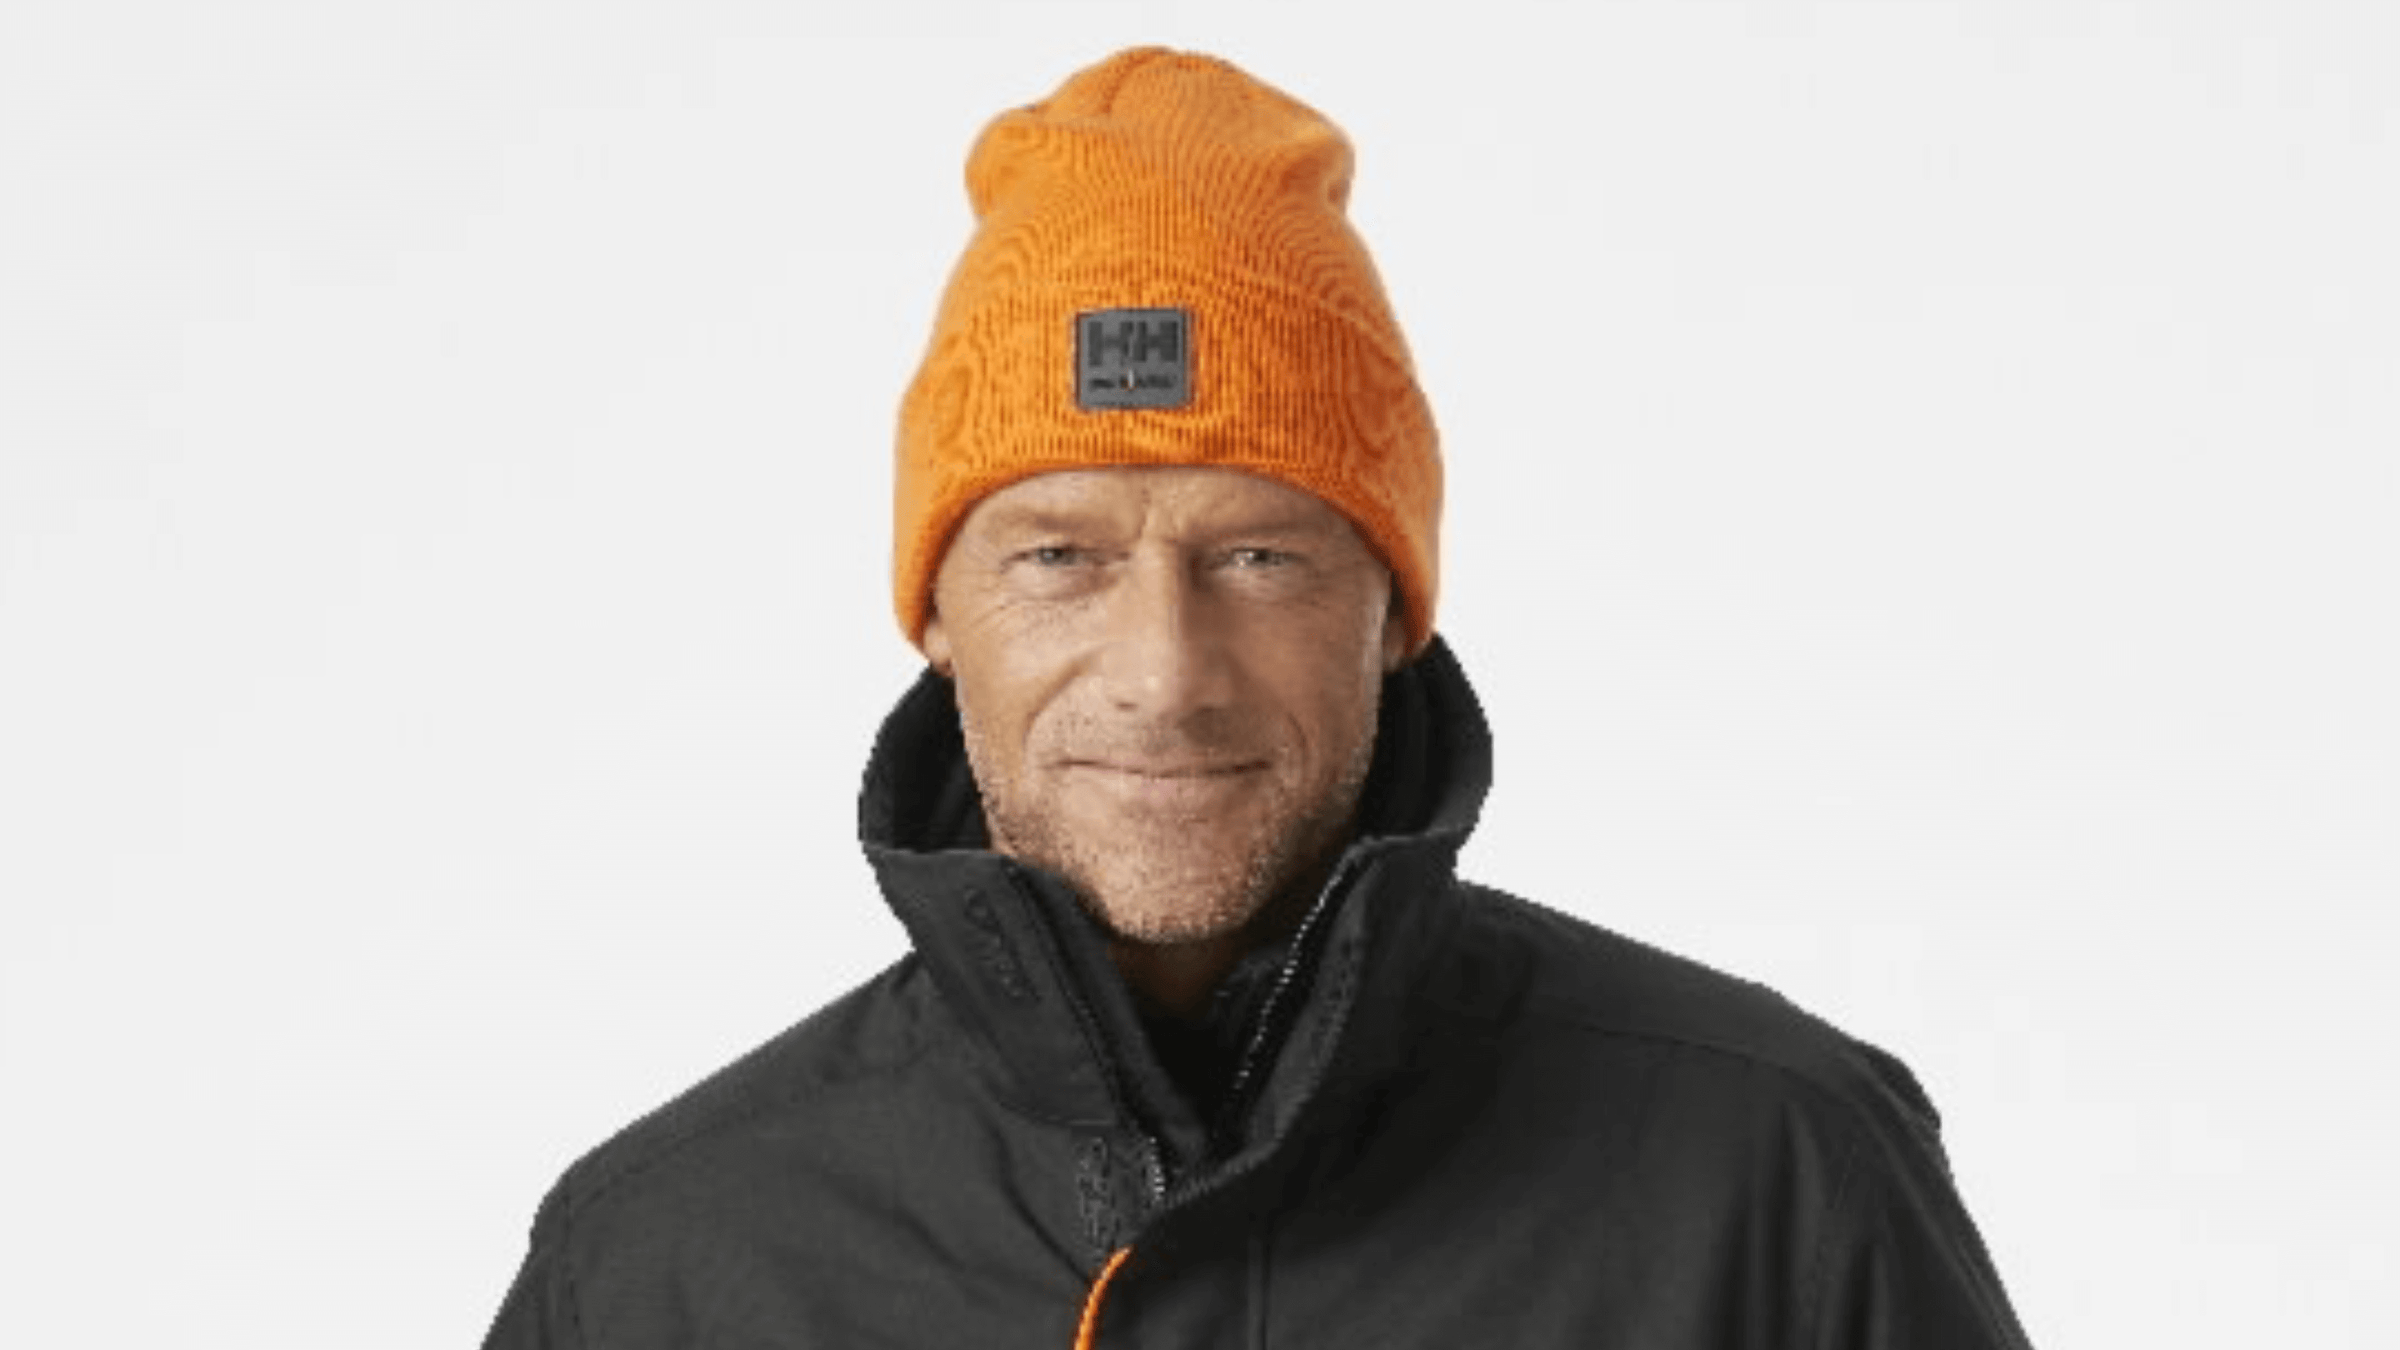 An image of someone wearing Helly Hansen Beanie